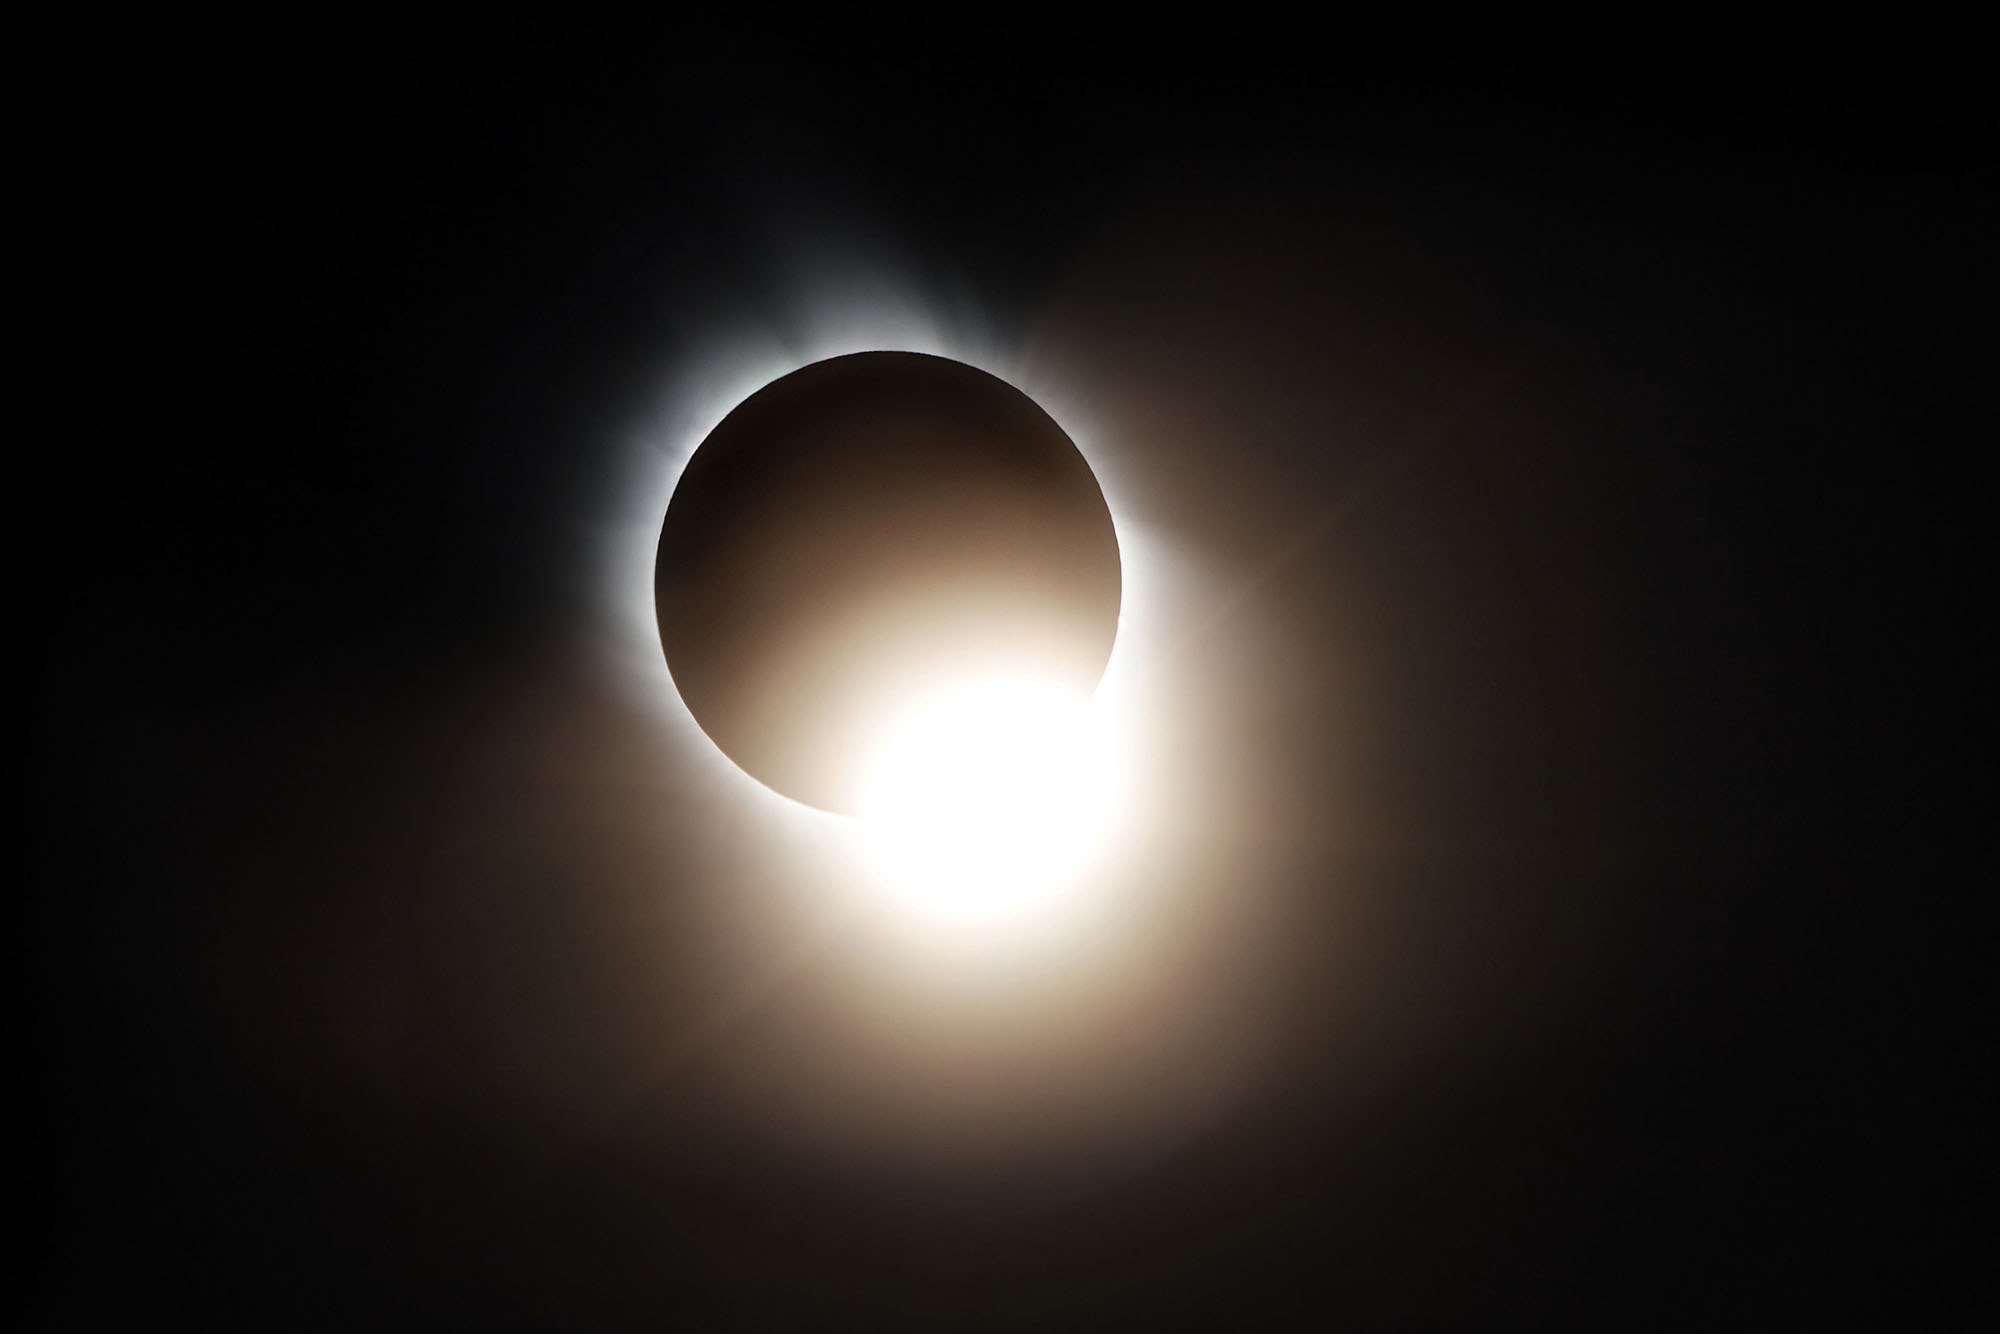 The diamond ring and the corona during the total solar eclipse of 2006 near Side in Turkey.